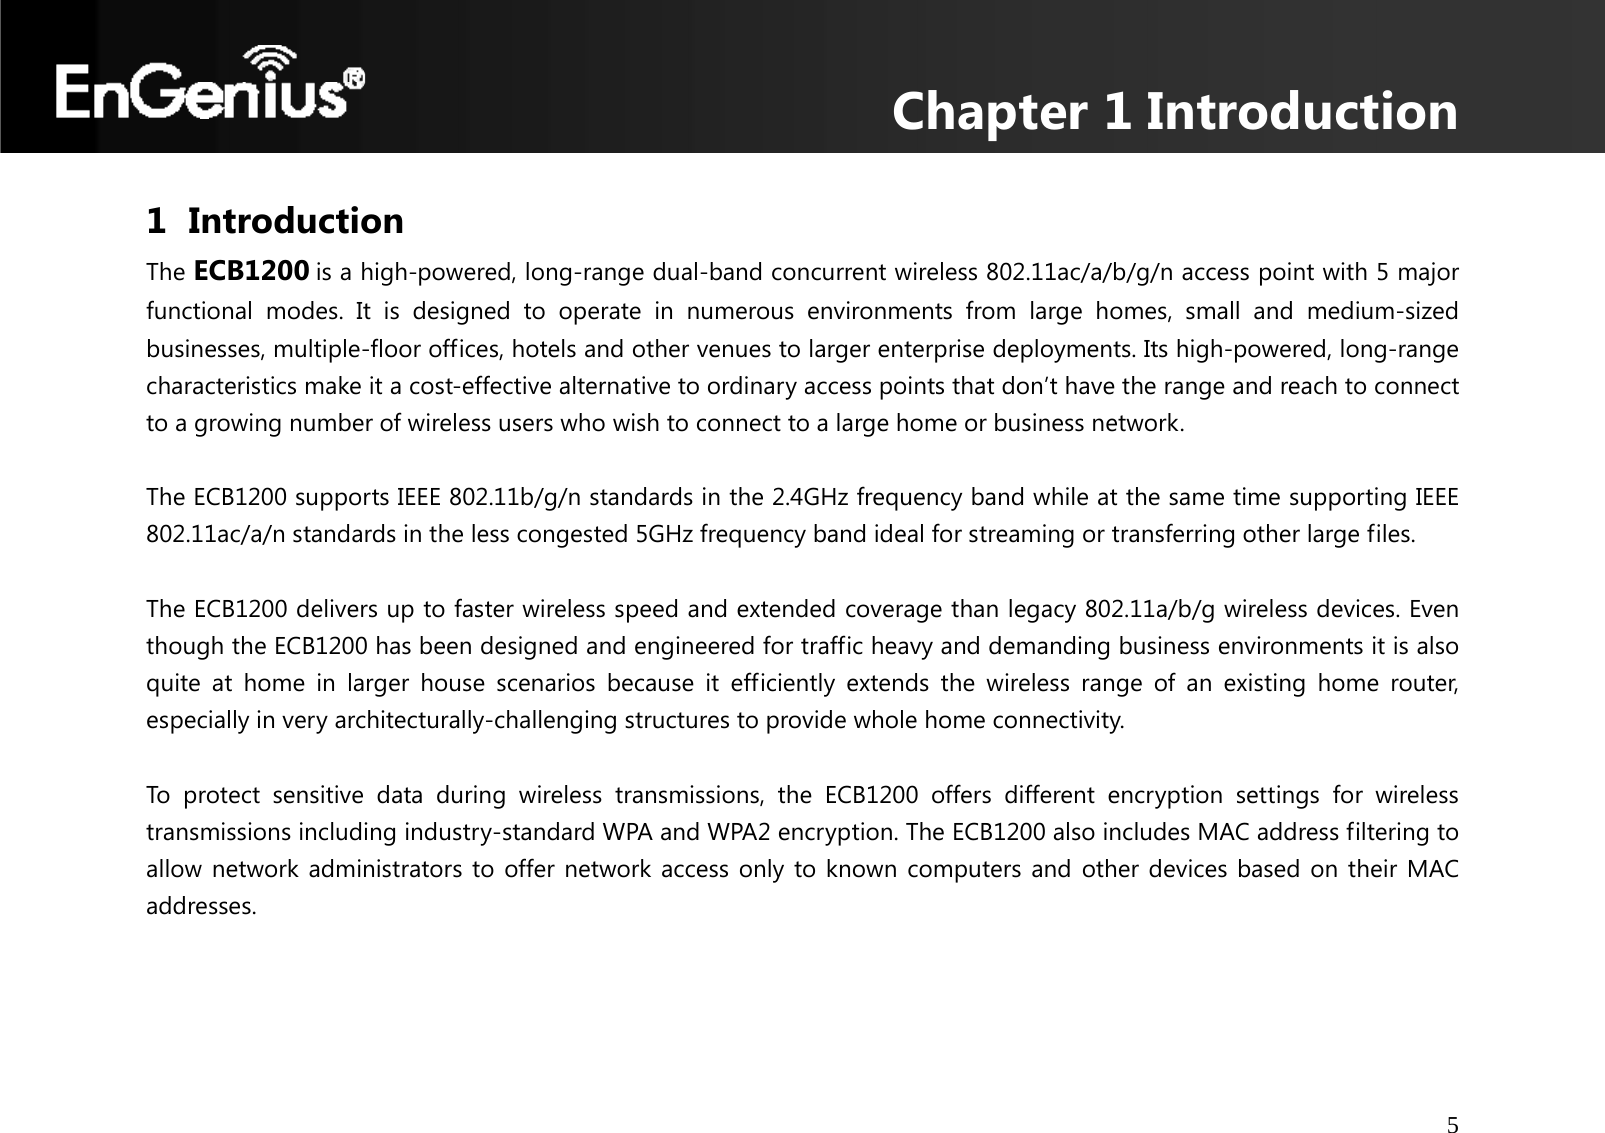 Chapter 1 Introduction 5  1 Introduction The ECB1200 is a high-powered, long-range dual-band concurrent wireless 802.11ac/a/b/g/n access point with 5 major functional modes. It is designed to operate in numerous environments from large homes, small and medium-sized businesses, multiple-floor offices, hotels and other venues to larger enterprise deployments. Its high-powered, long-range characteristics make it a cost-effective alternative to ordinary access points that don’t have the range and reach to connect to a growing number of wireless users who wish to connect to a large home or business network.  The ECB1200 supports IEEE 802.11b/g/n standards in the 2.4GHz frequency band while at the same time supporting IEEE 802.11ac/a/n standards in the less congested 5GHz frequency band ideal for streaming or transferring other large files.  The ECB1200 delivers up to faster wireless speed and extended coverage than legacy 802.11a/b/g wireless devices. Even though the ECB1200 has been designed and engineered for traffic heavy and demanding business environments it is also quite at home in larger house scenarios because it efficiently extends the wireless range of an existing home router, especially in very architecturally-challenging structures to provide whole home connectivity.  To protect sensitive data during wireless transmissions, the ECB1200 offers different encryption settings for wireless transmissions including industry-standard WPA and WPA2 encryption. The ECB1200 also includes MAC address filtering to allow network administrators to offer network access only to known computers and other devices based on their MAC addresses.   